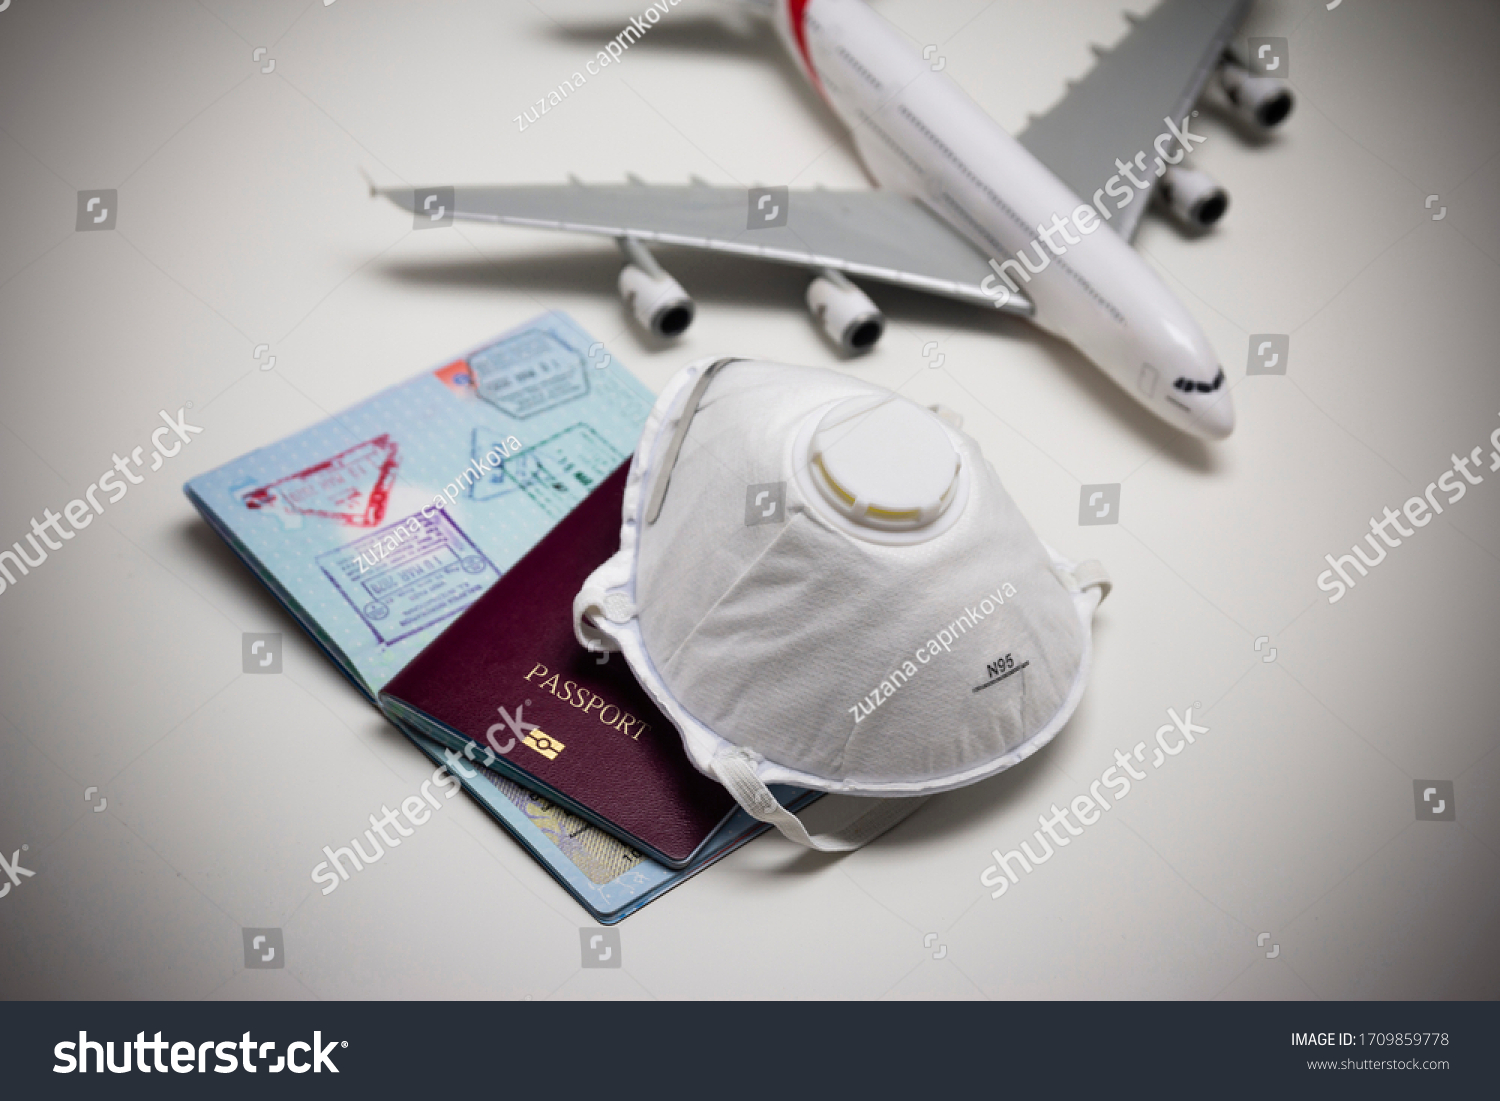 Travelling during corona virus epidemic. Passport and protective face mask respirator. Coronavirus and travel concept. Travelling with face mask. Corona virus prevention. Flights cancelled. Stay Home. #1709859778